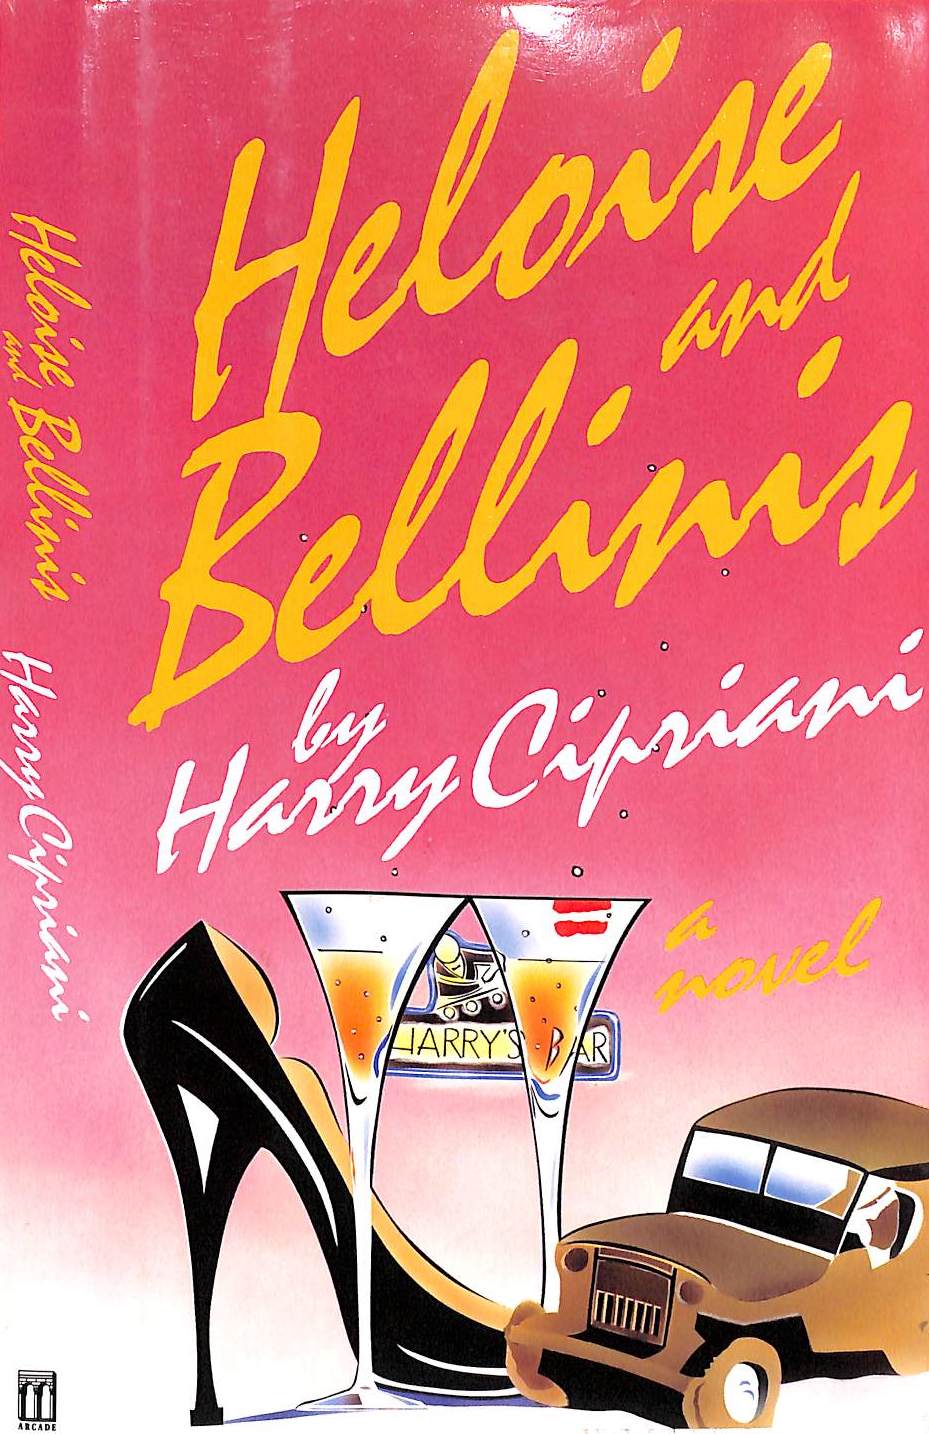 "Heloise And Bellinis" 1991 CIPRIANI, Harry (INSCRIBED)